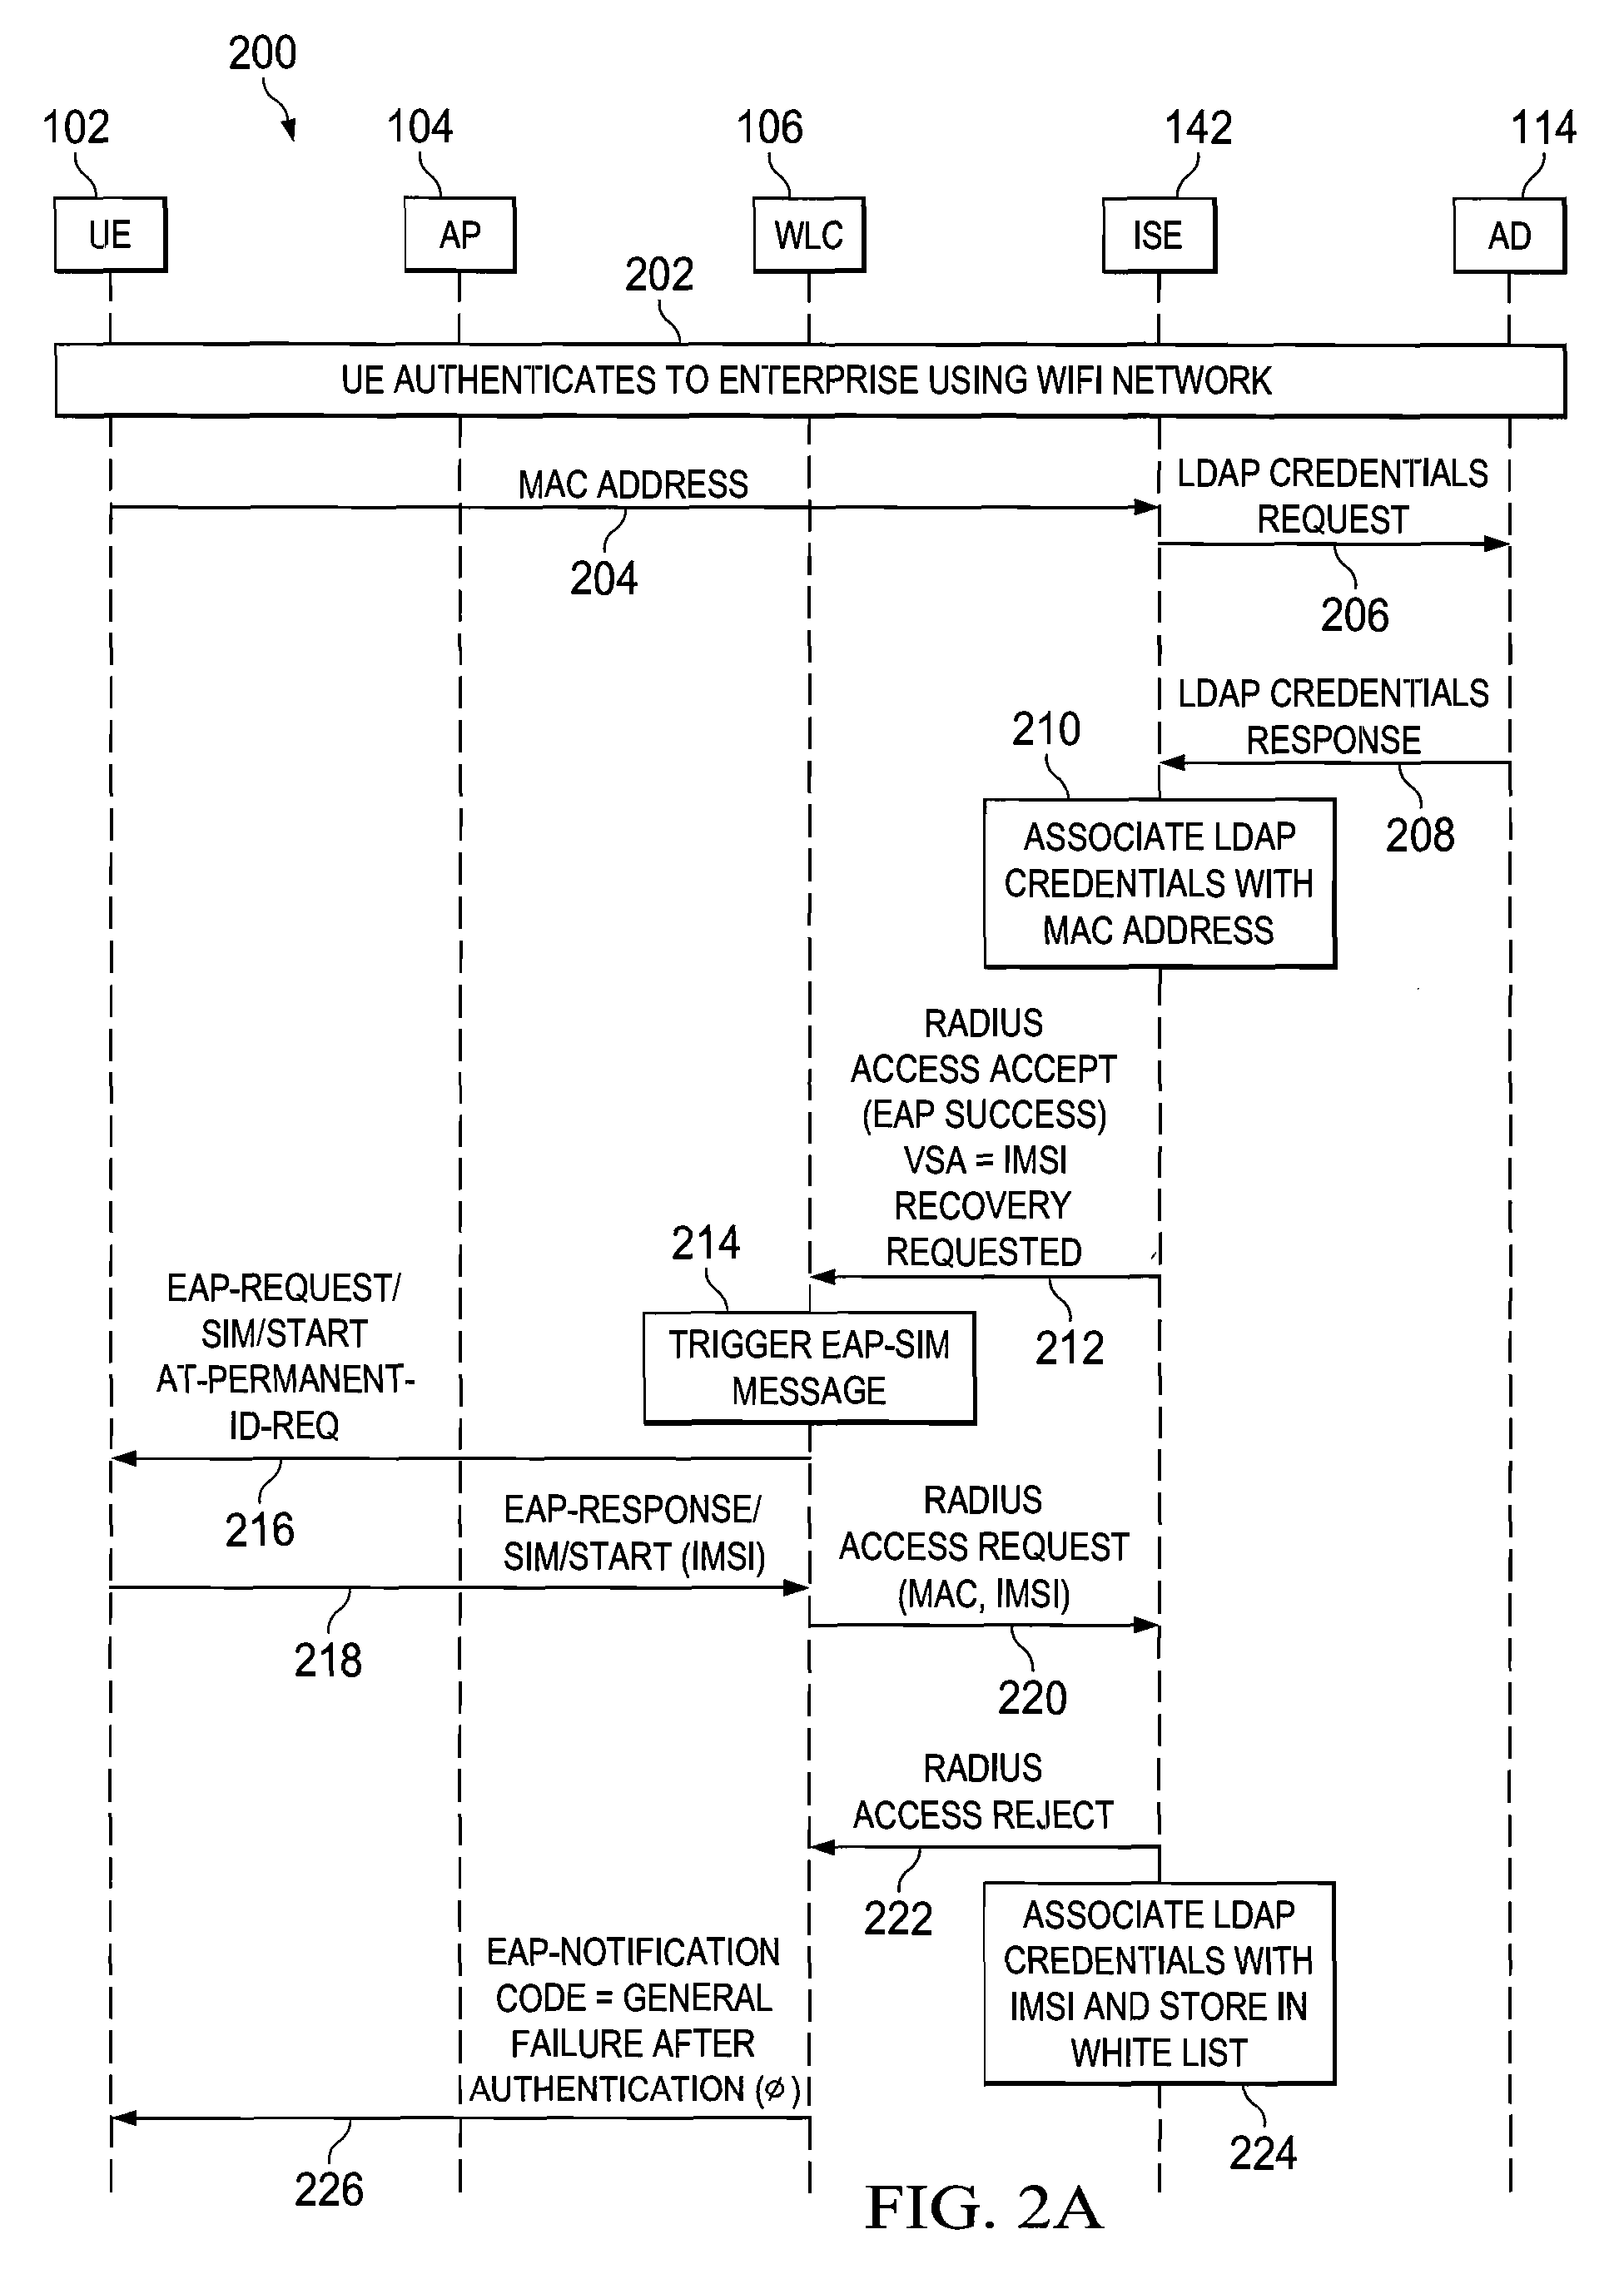 System and method for automated whitelist management in an enterprise small cell network environment